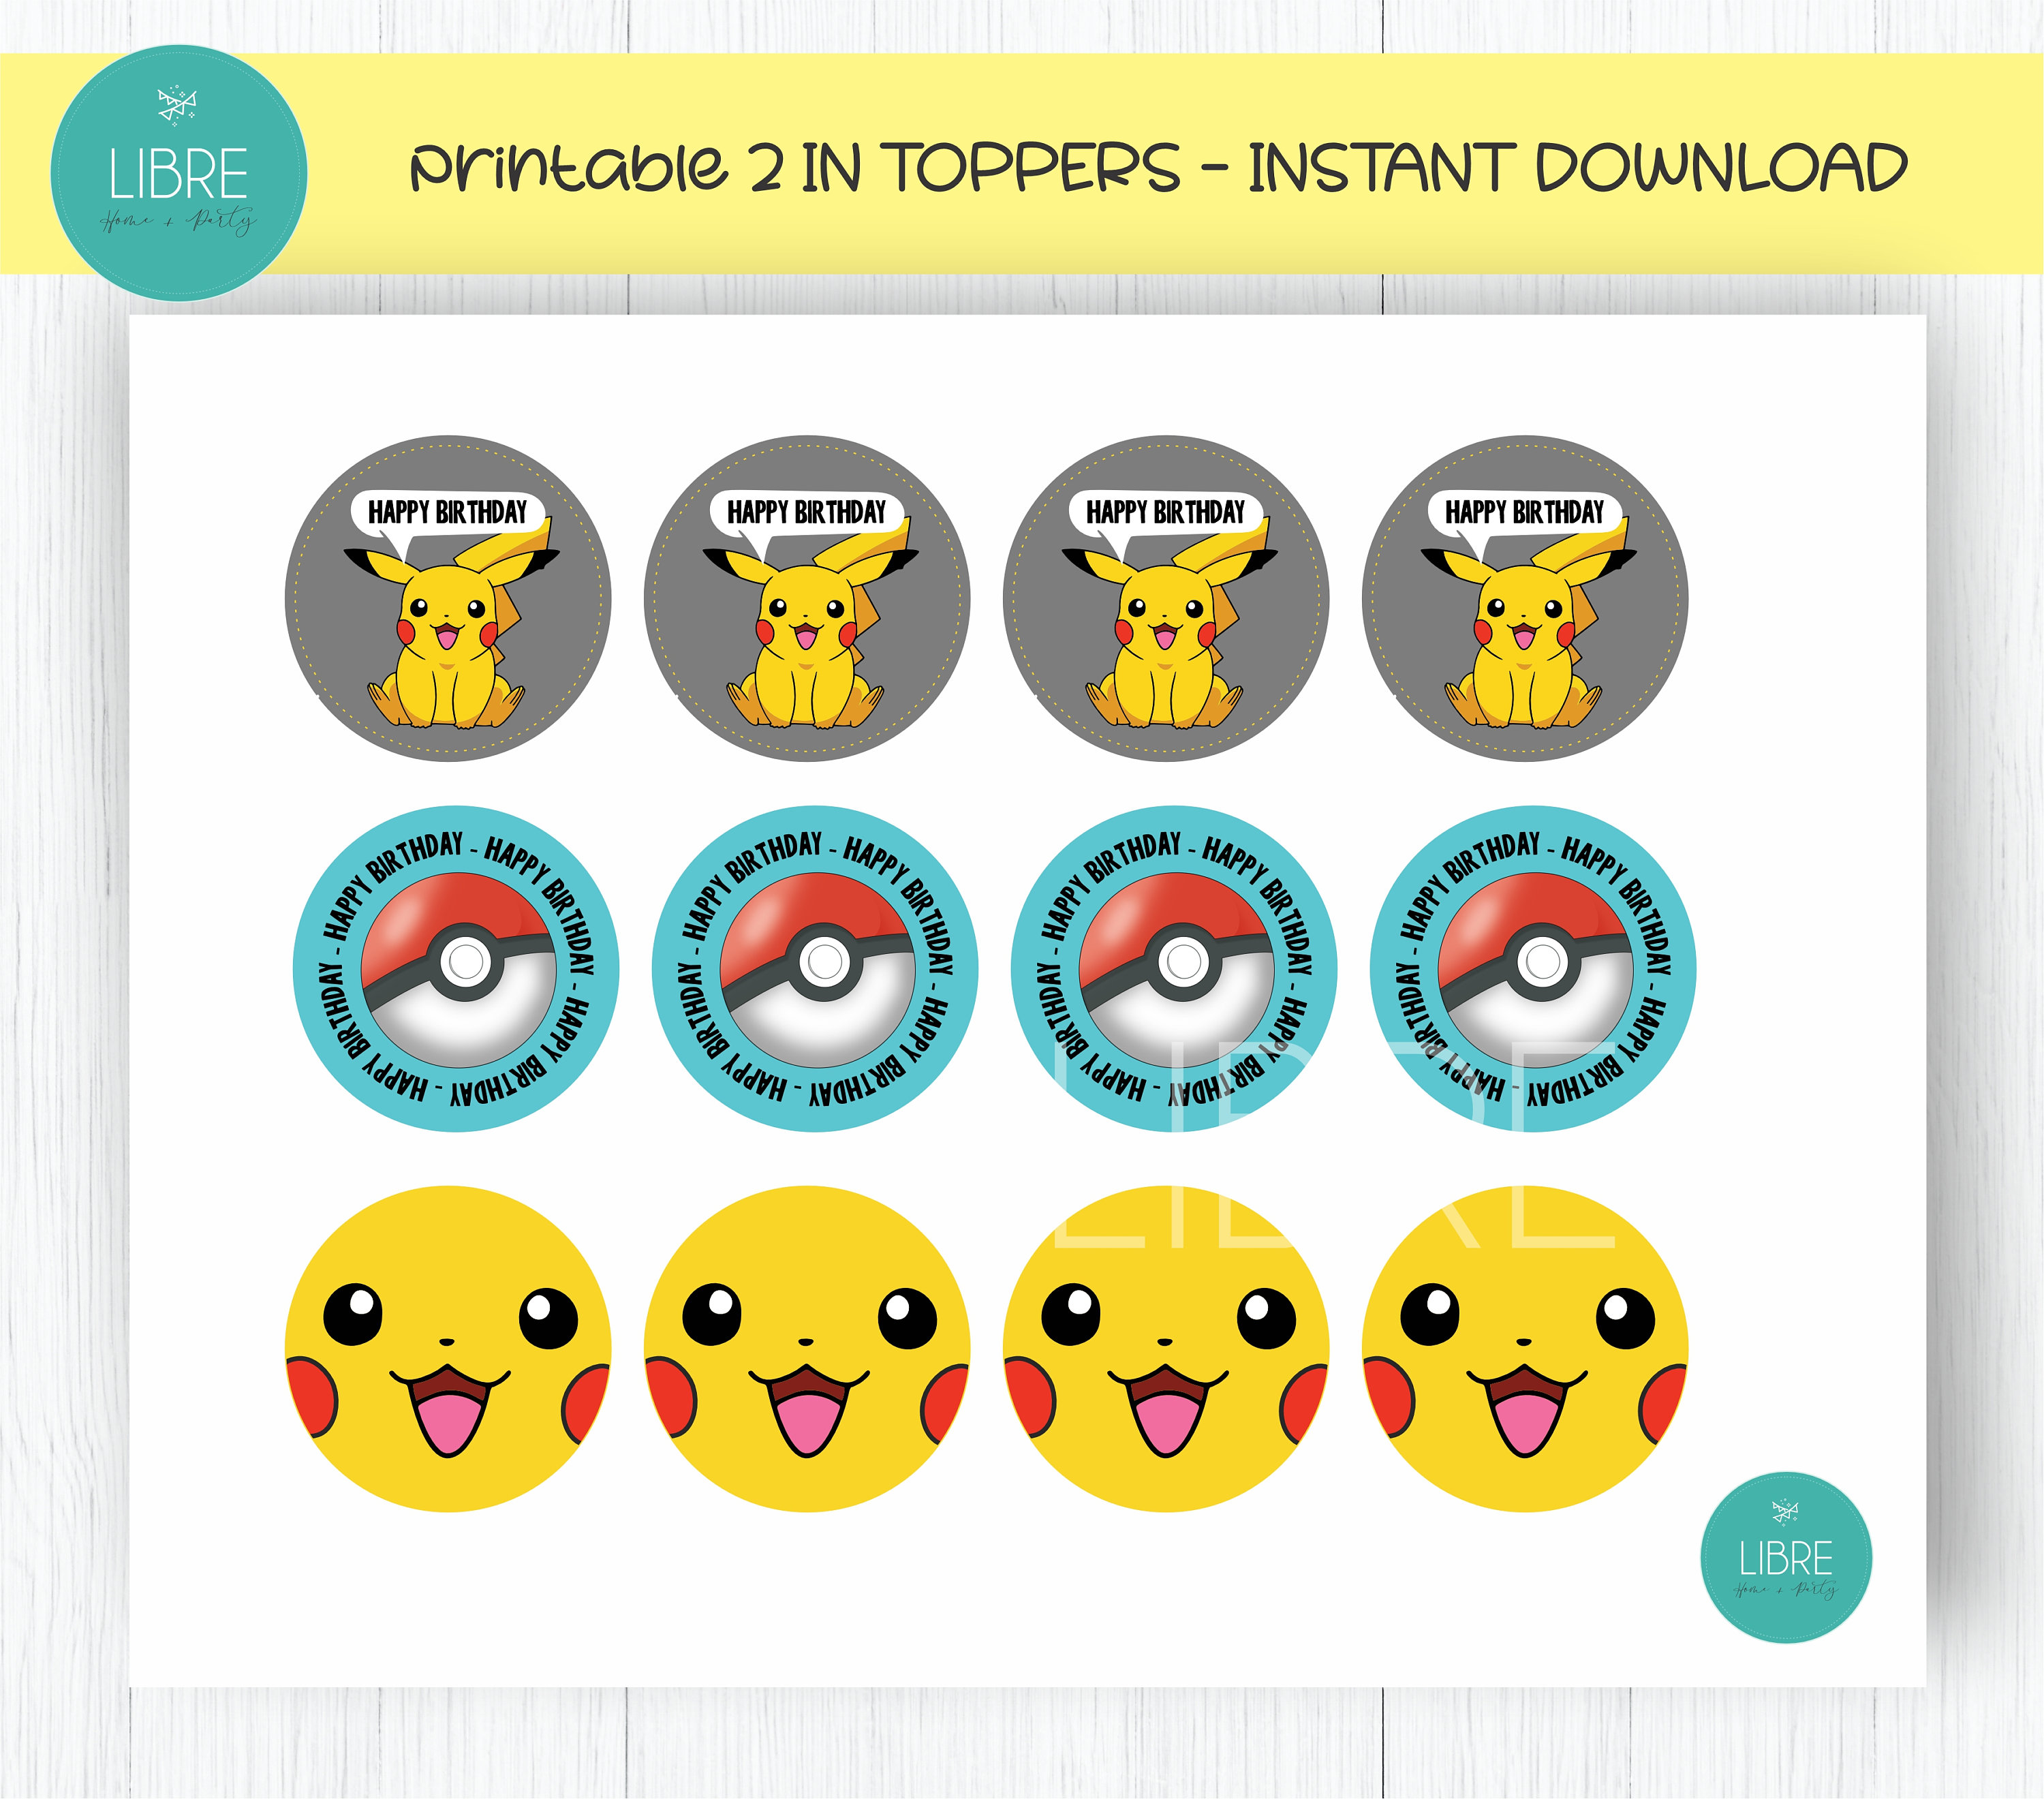 Free Pokemon Cake Toppers Printable At Home